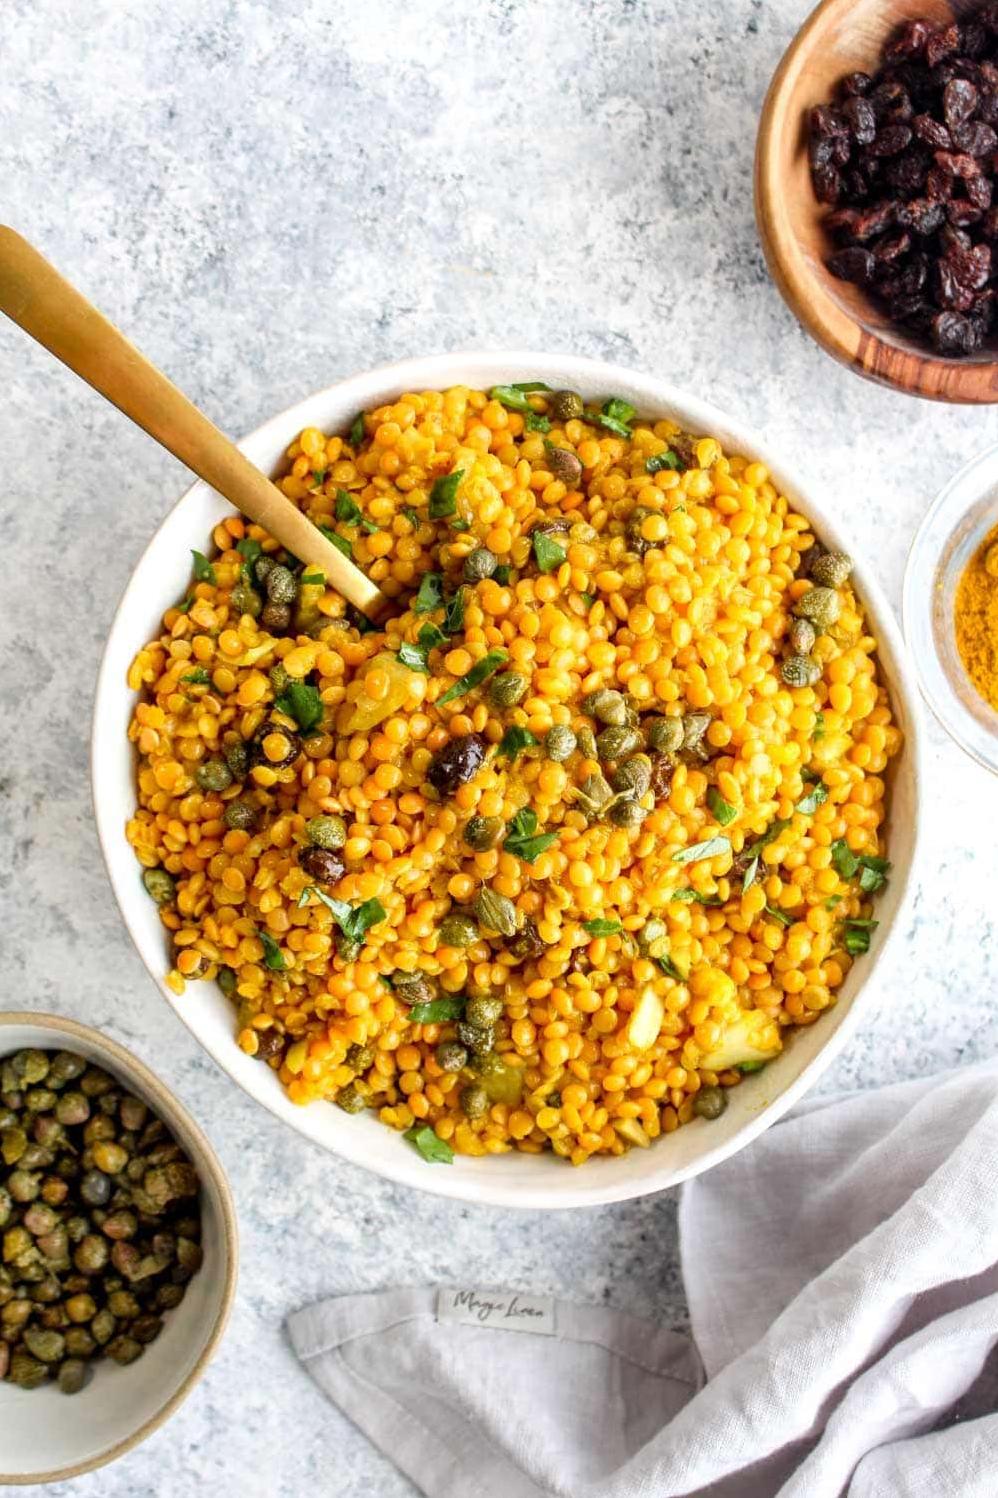 Delicious and Nutritious Curried Lentil Salad Recipe